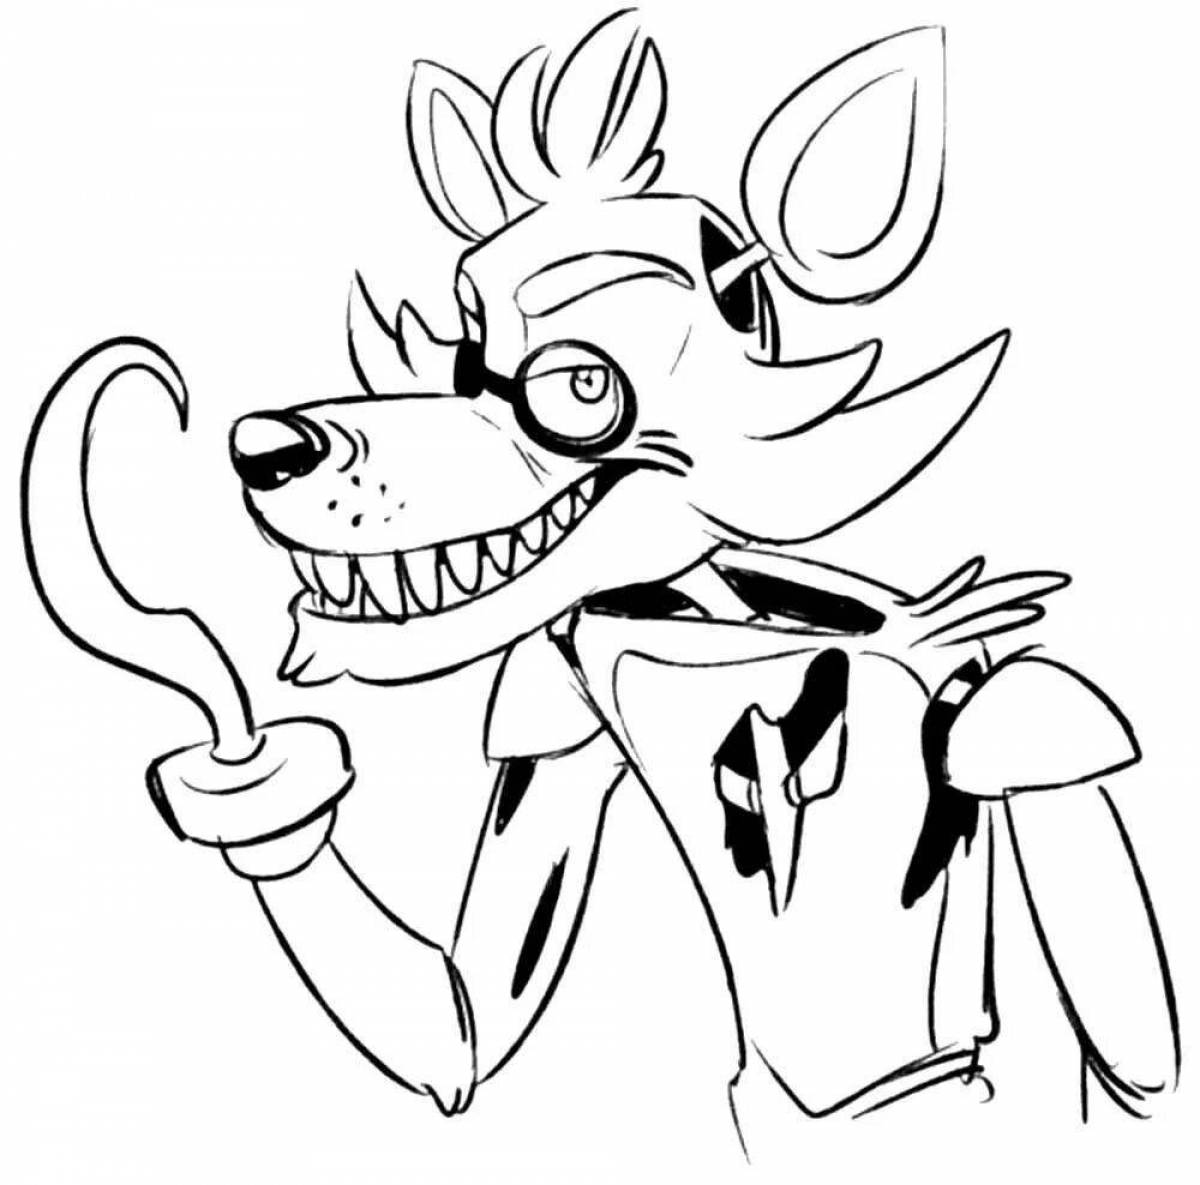 Colorful fnaf foxy coloring book